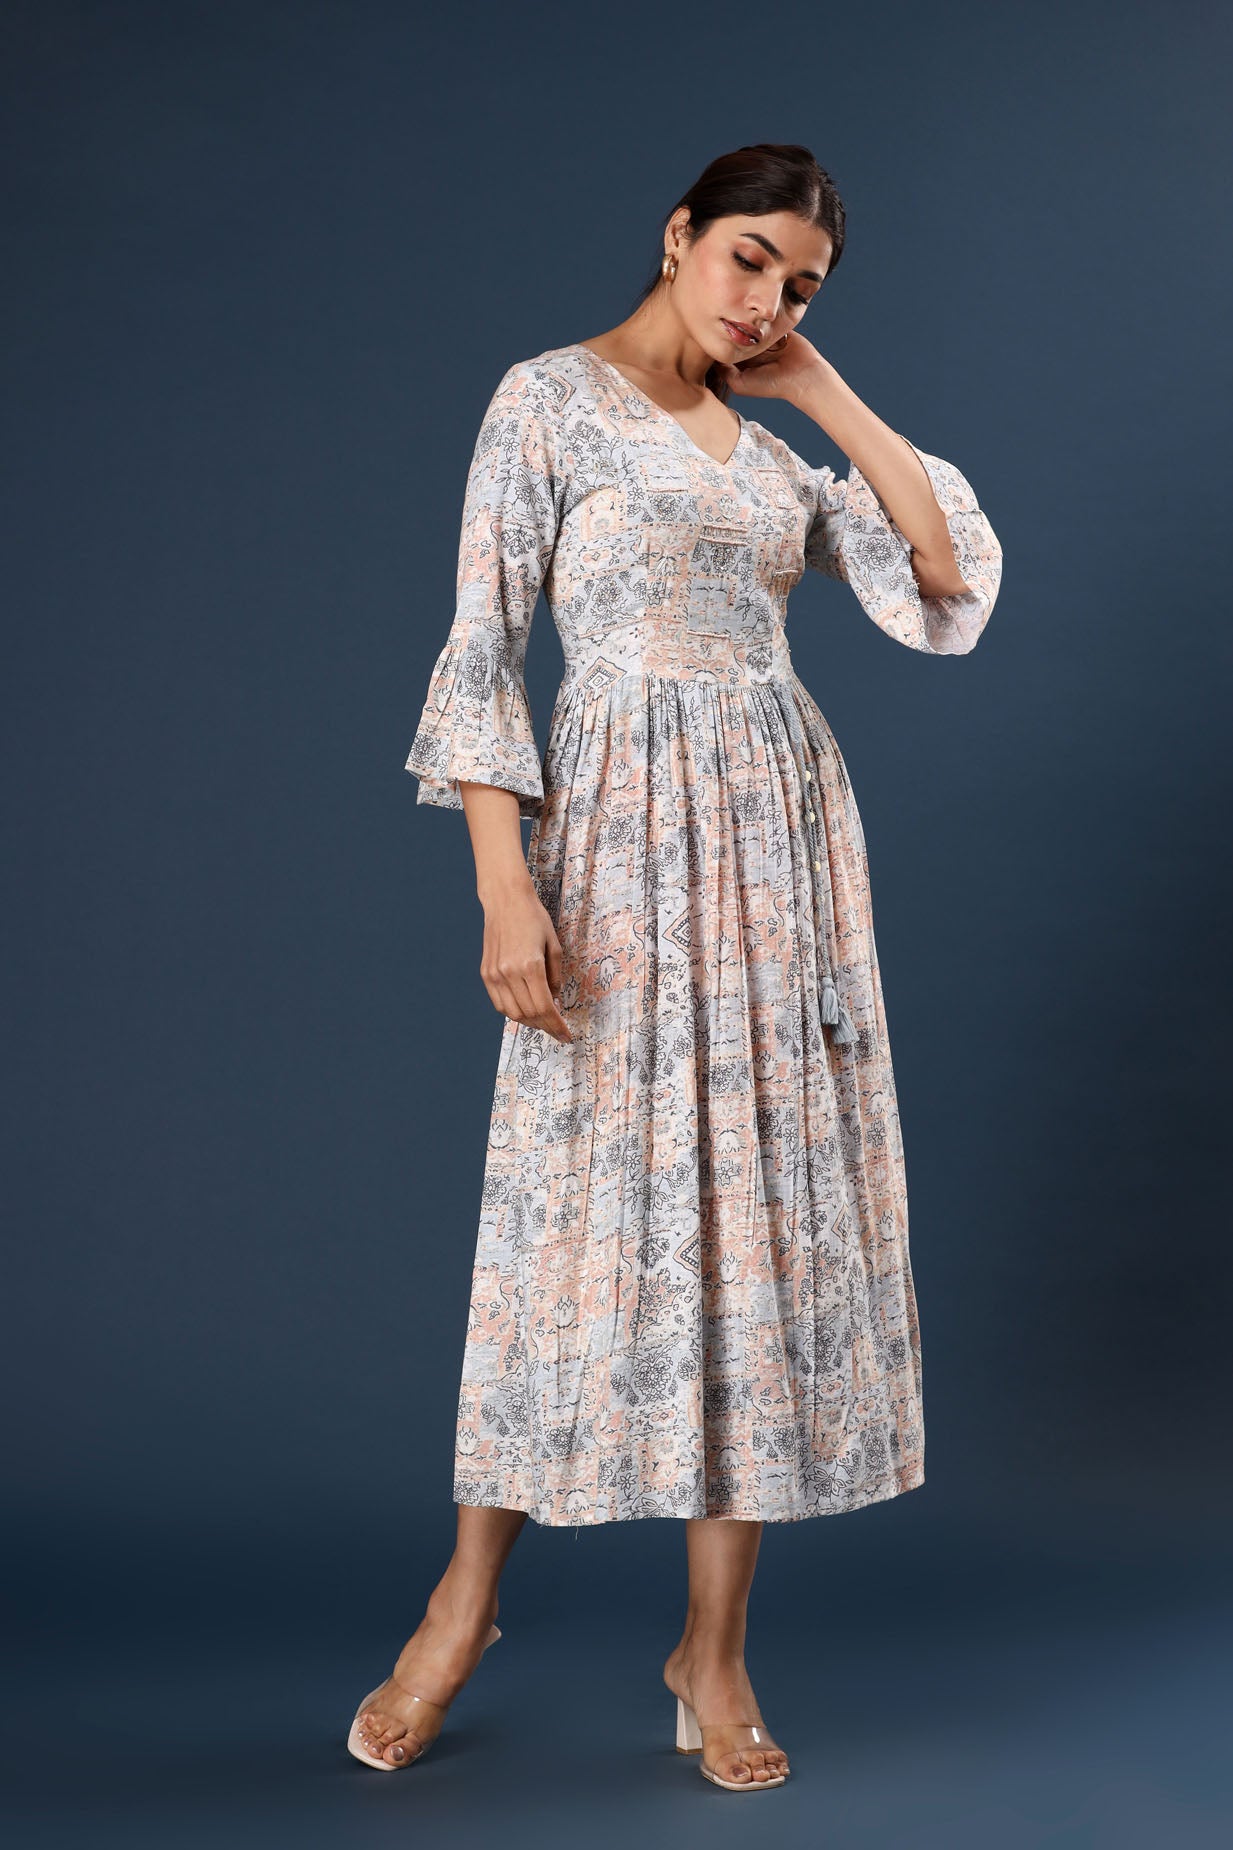 The Bell Sleeved Midi